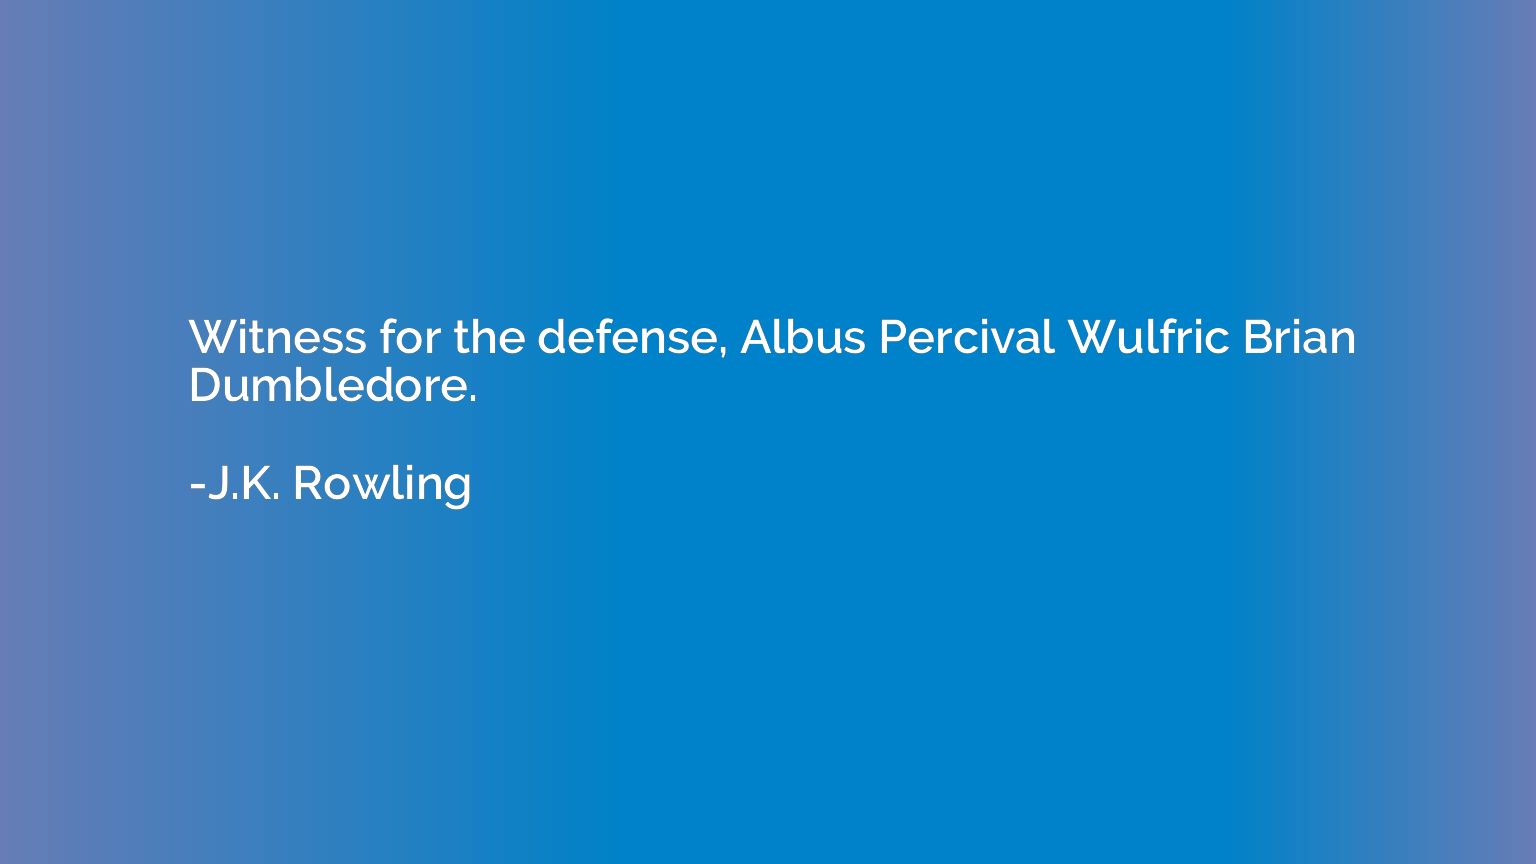 Witness for the defense, Albus Percival Wulfric Brian Dumble